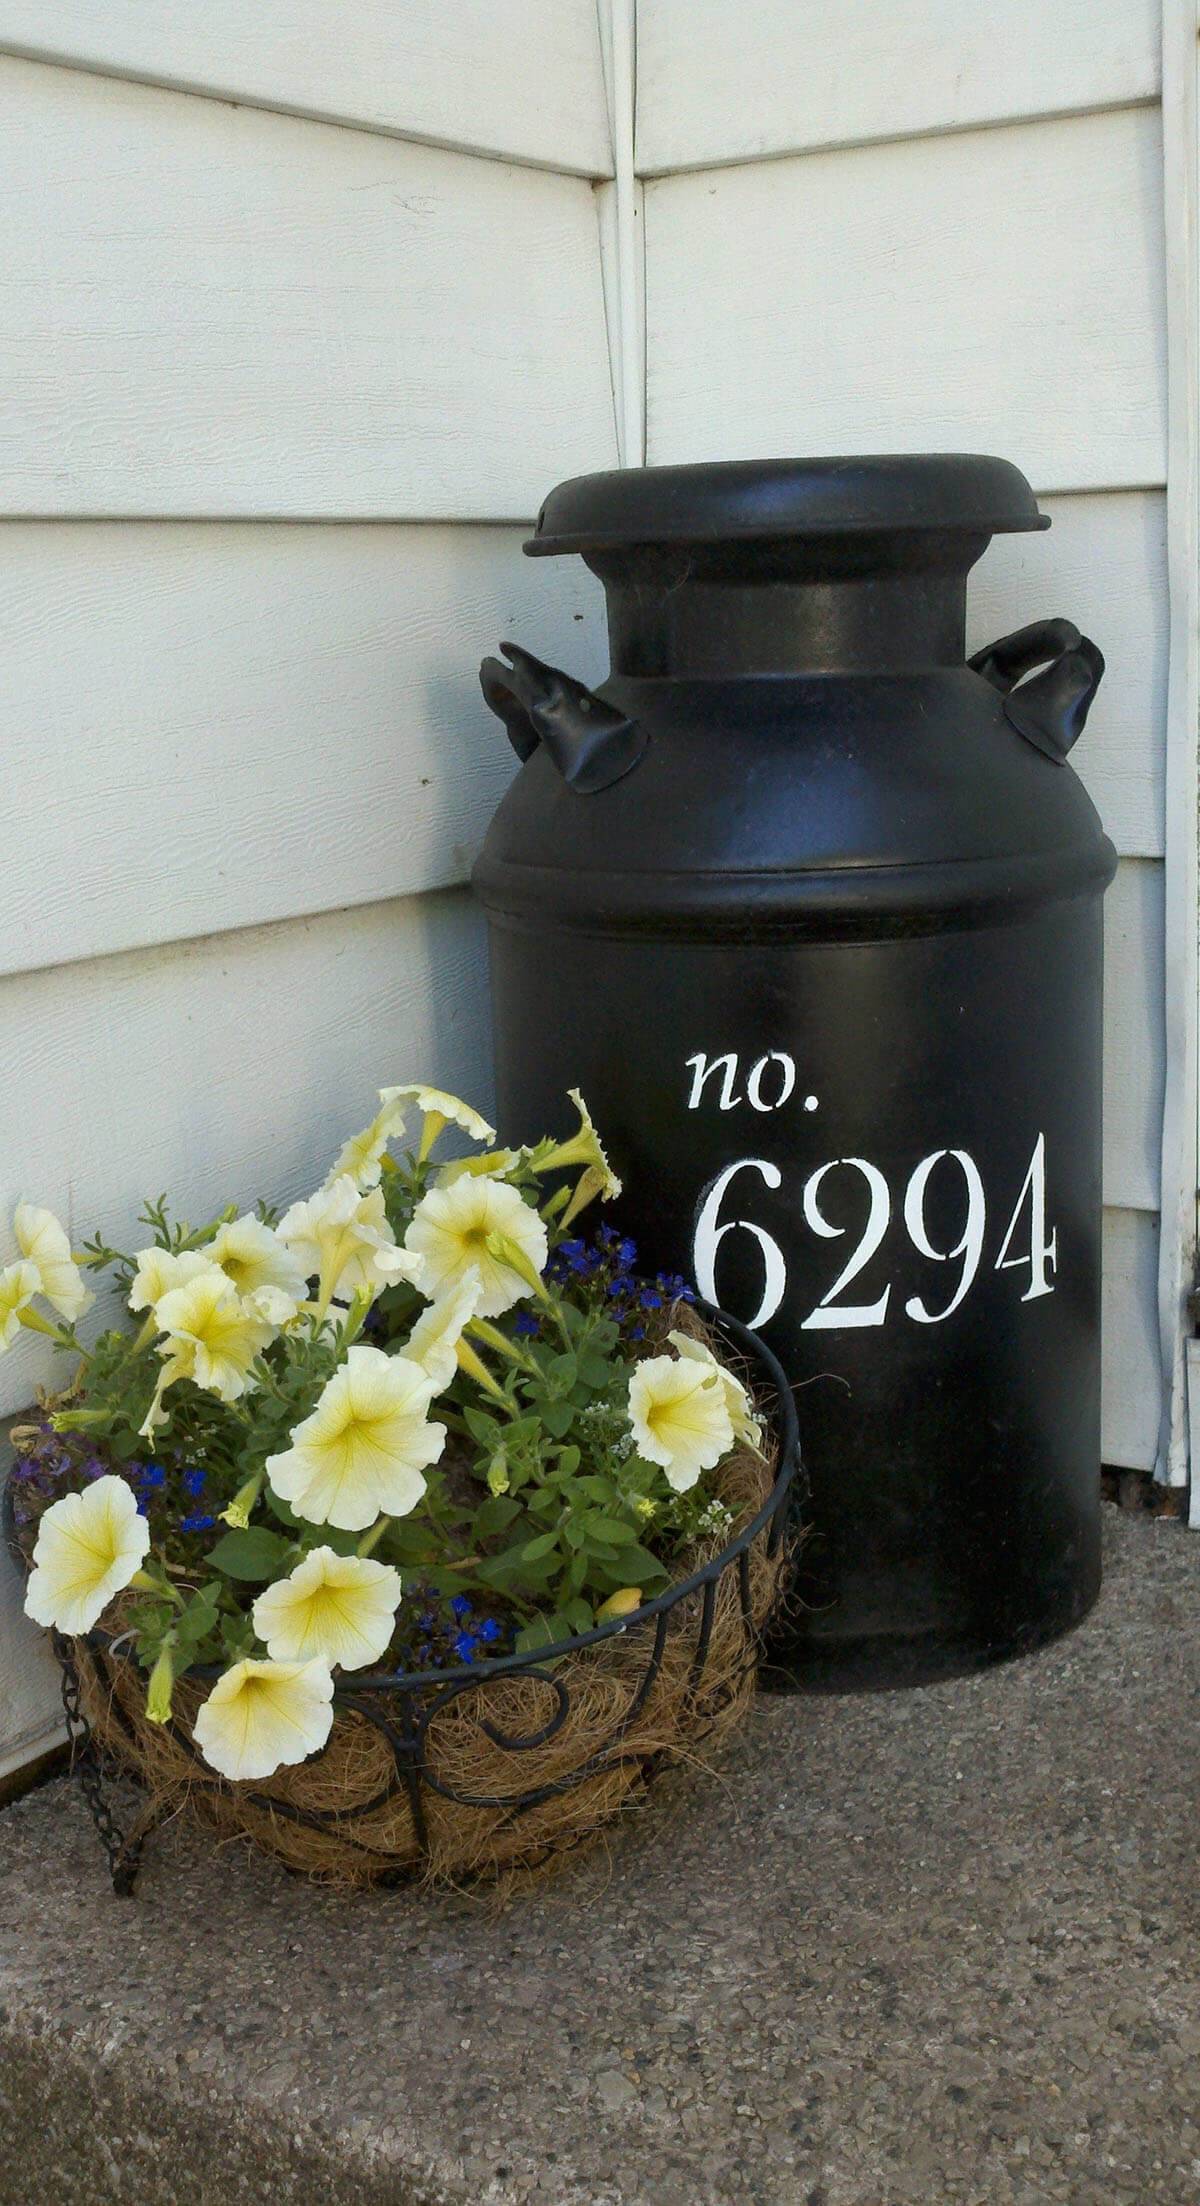 black milk jug with house numbers painted on it next to planter on porch